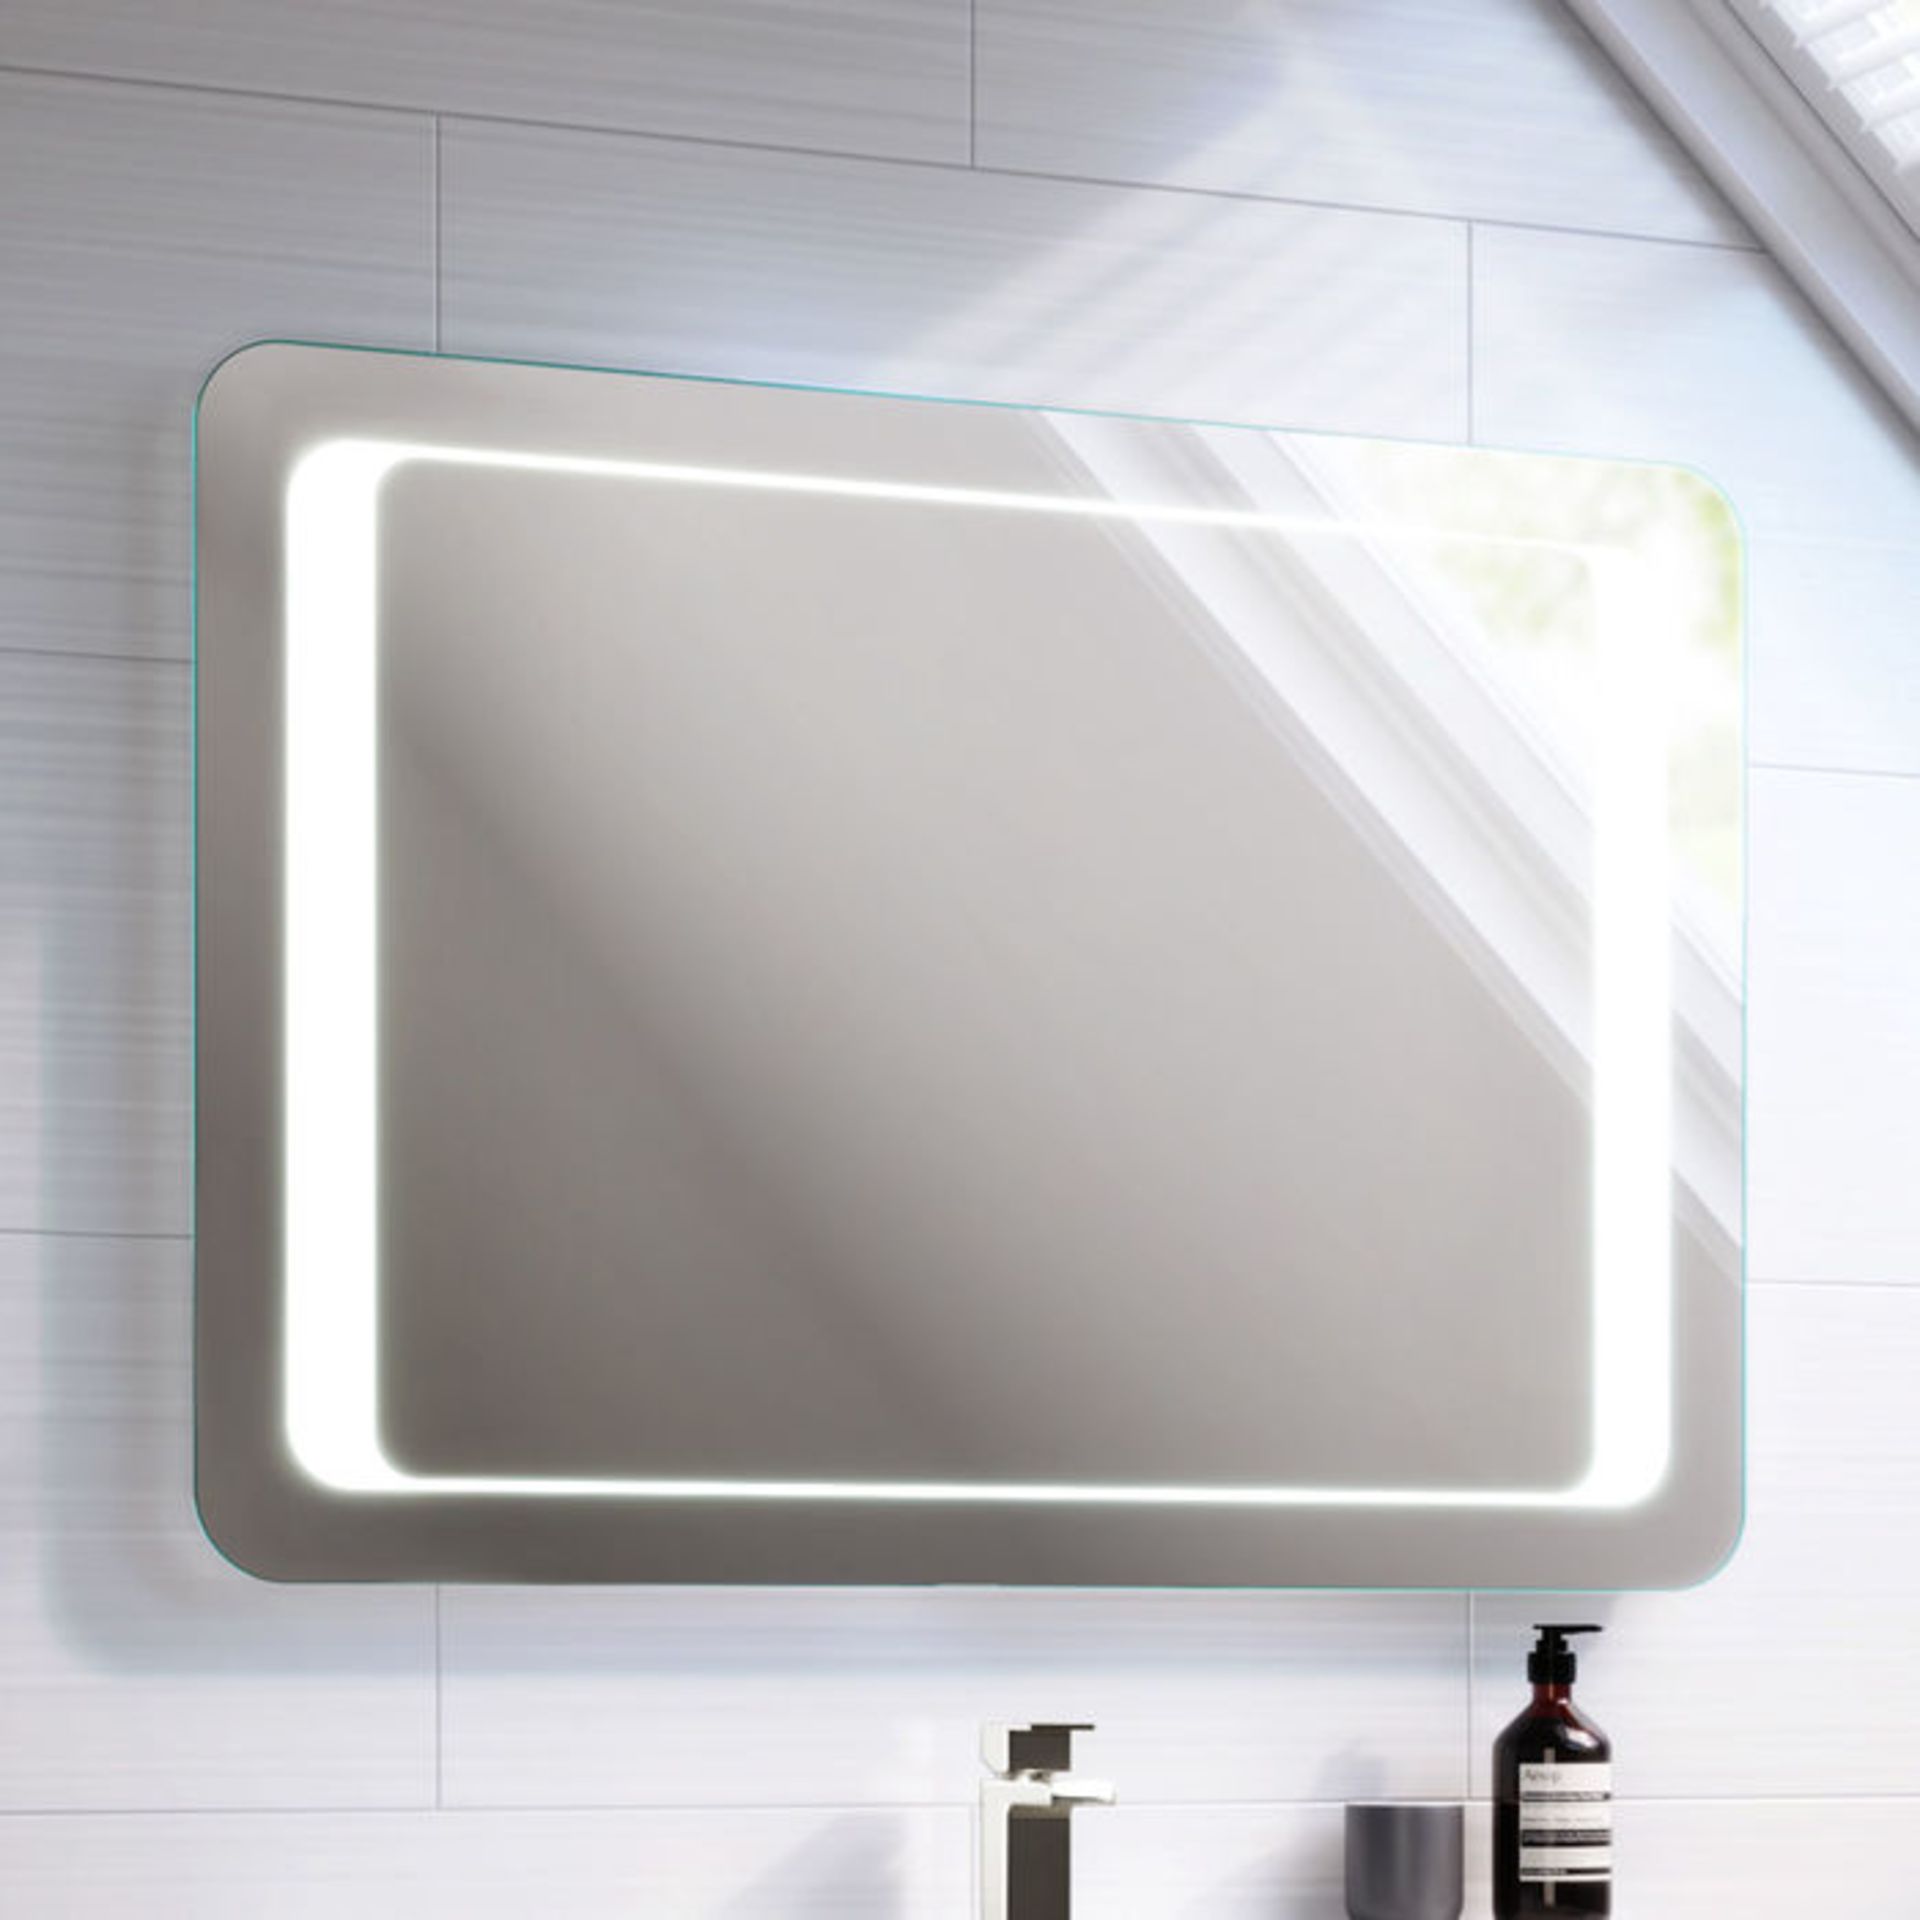 (H164) 900x650mm Quasar Illuminated LED Mirror. RRP £399.99. Energy efficient LED lighting with IP44 - Image 4 of 6